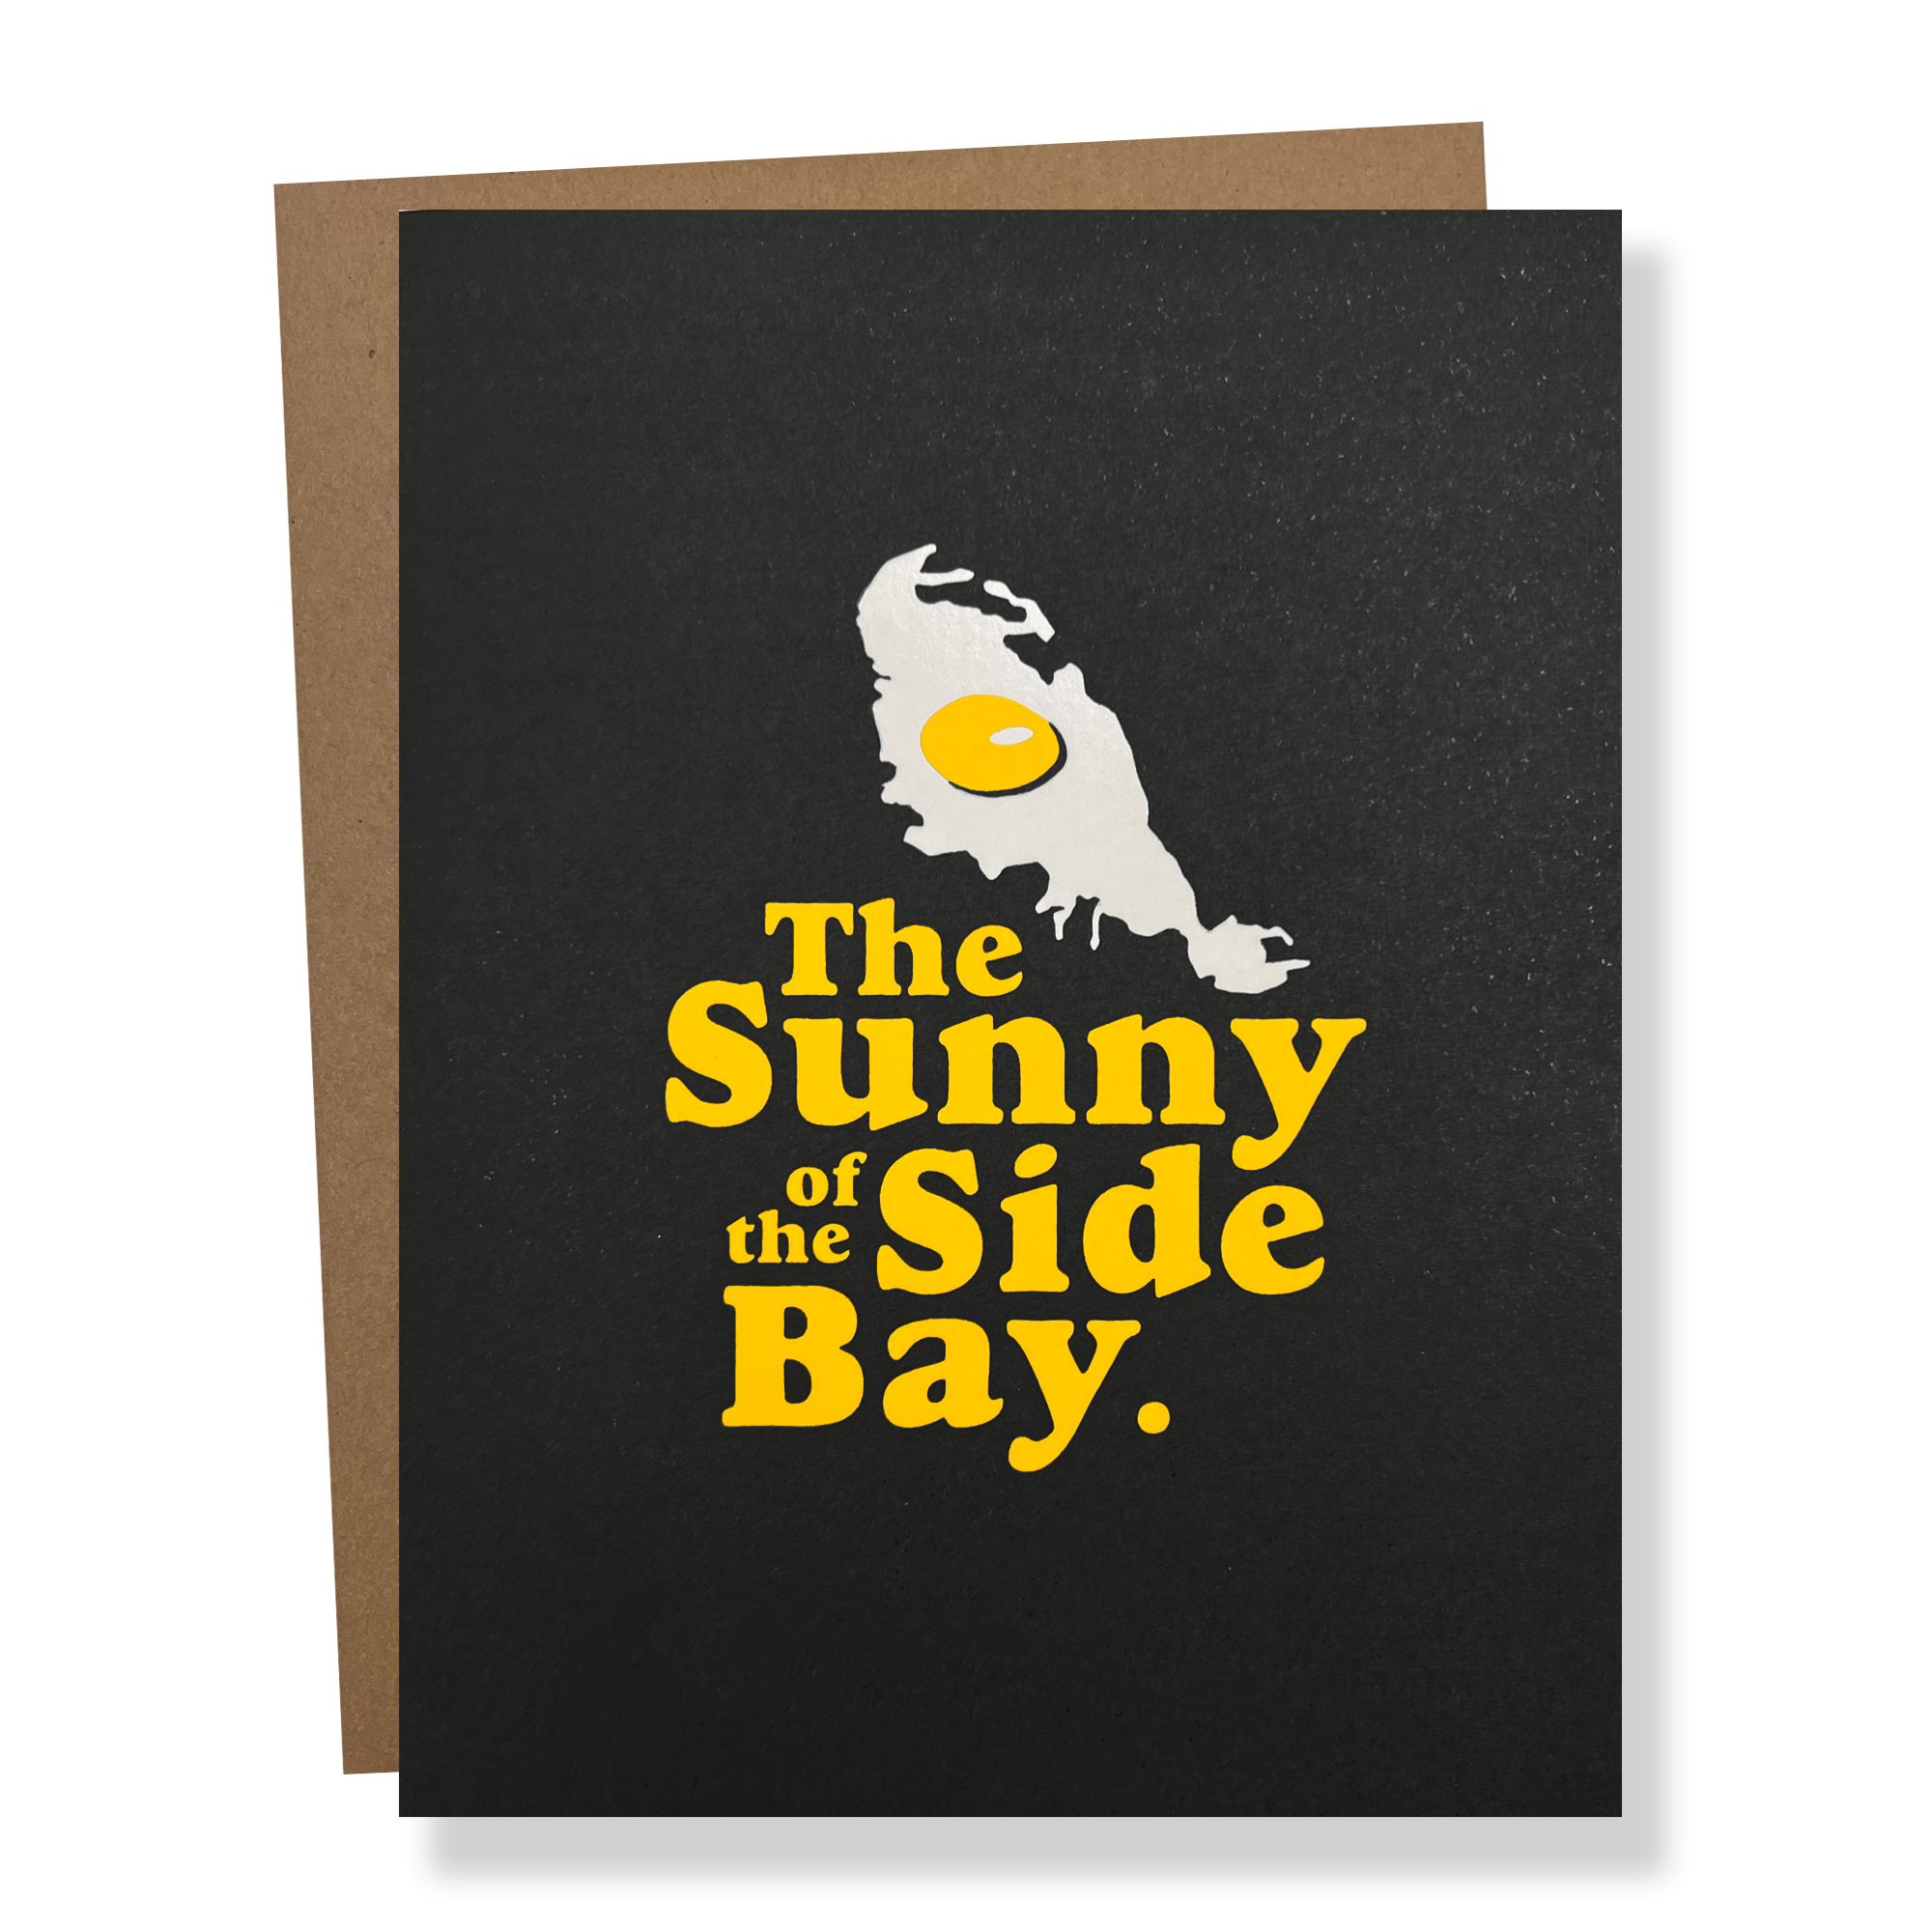 Black greeting card with The Sunnyside of the Bay wordmark and logo with a brown envelope.